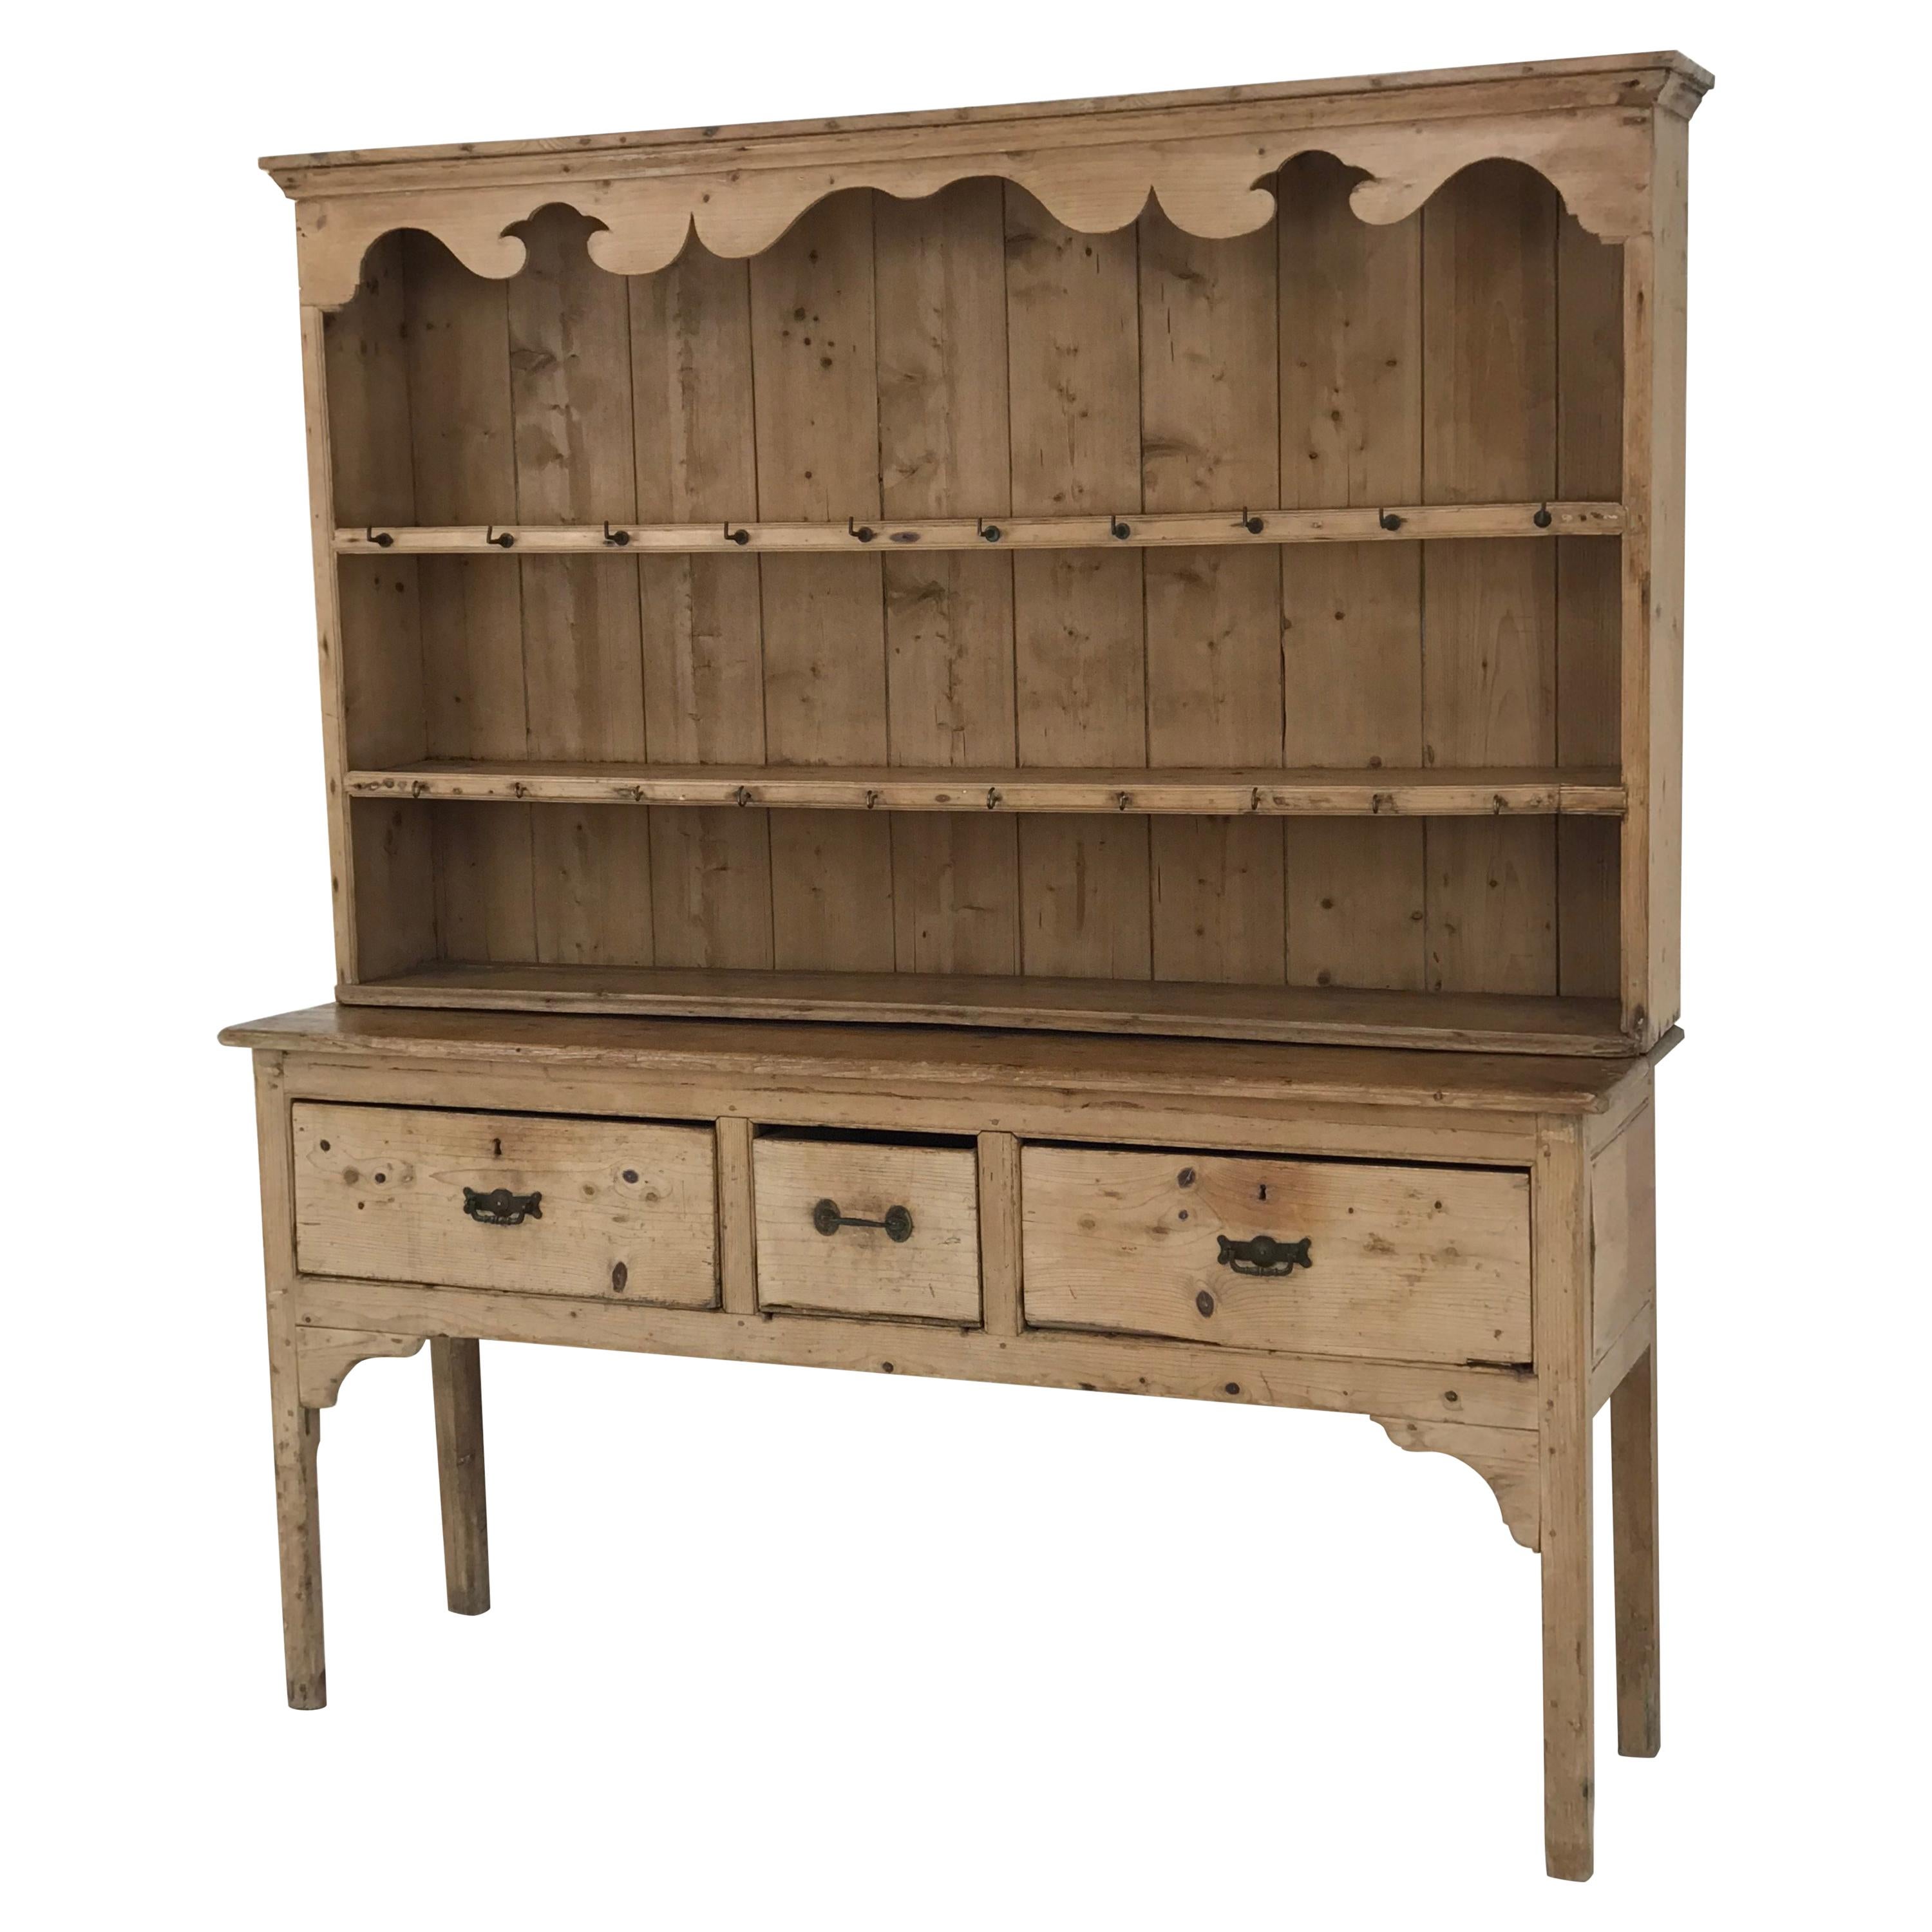 English Dresser with Top, 19th Century